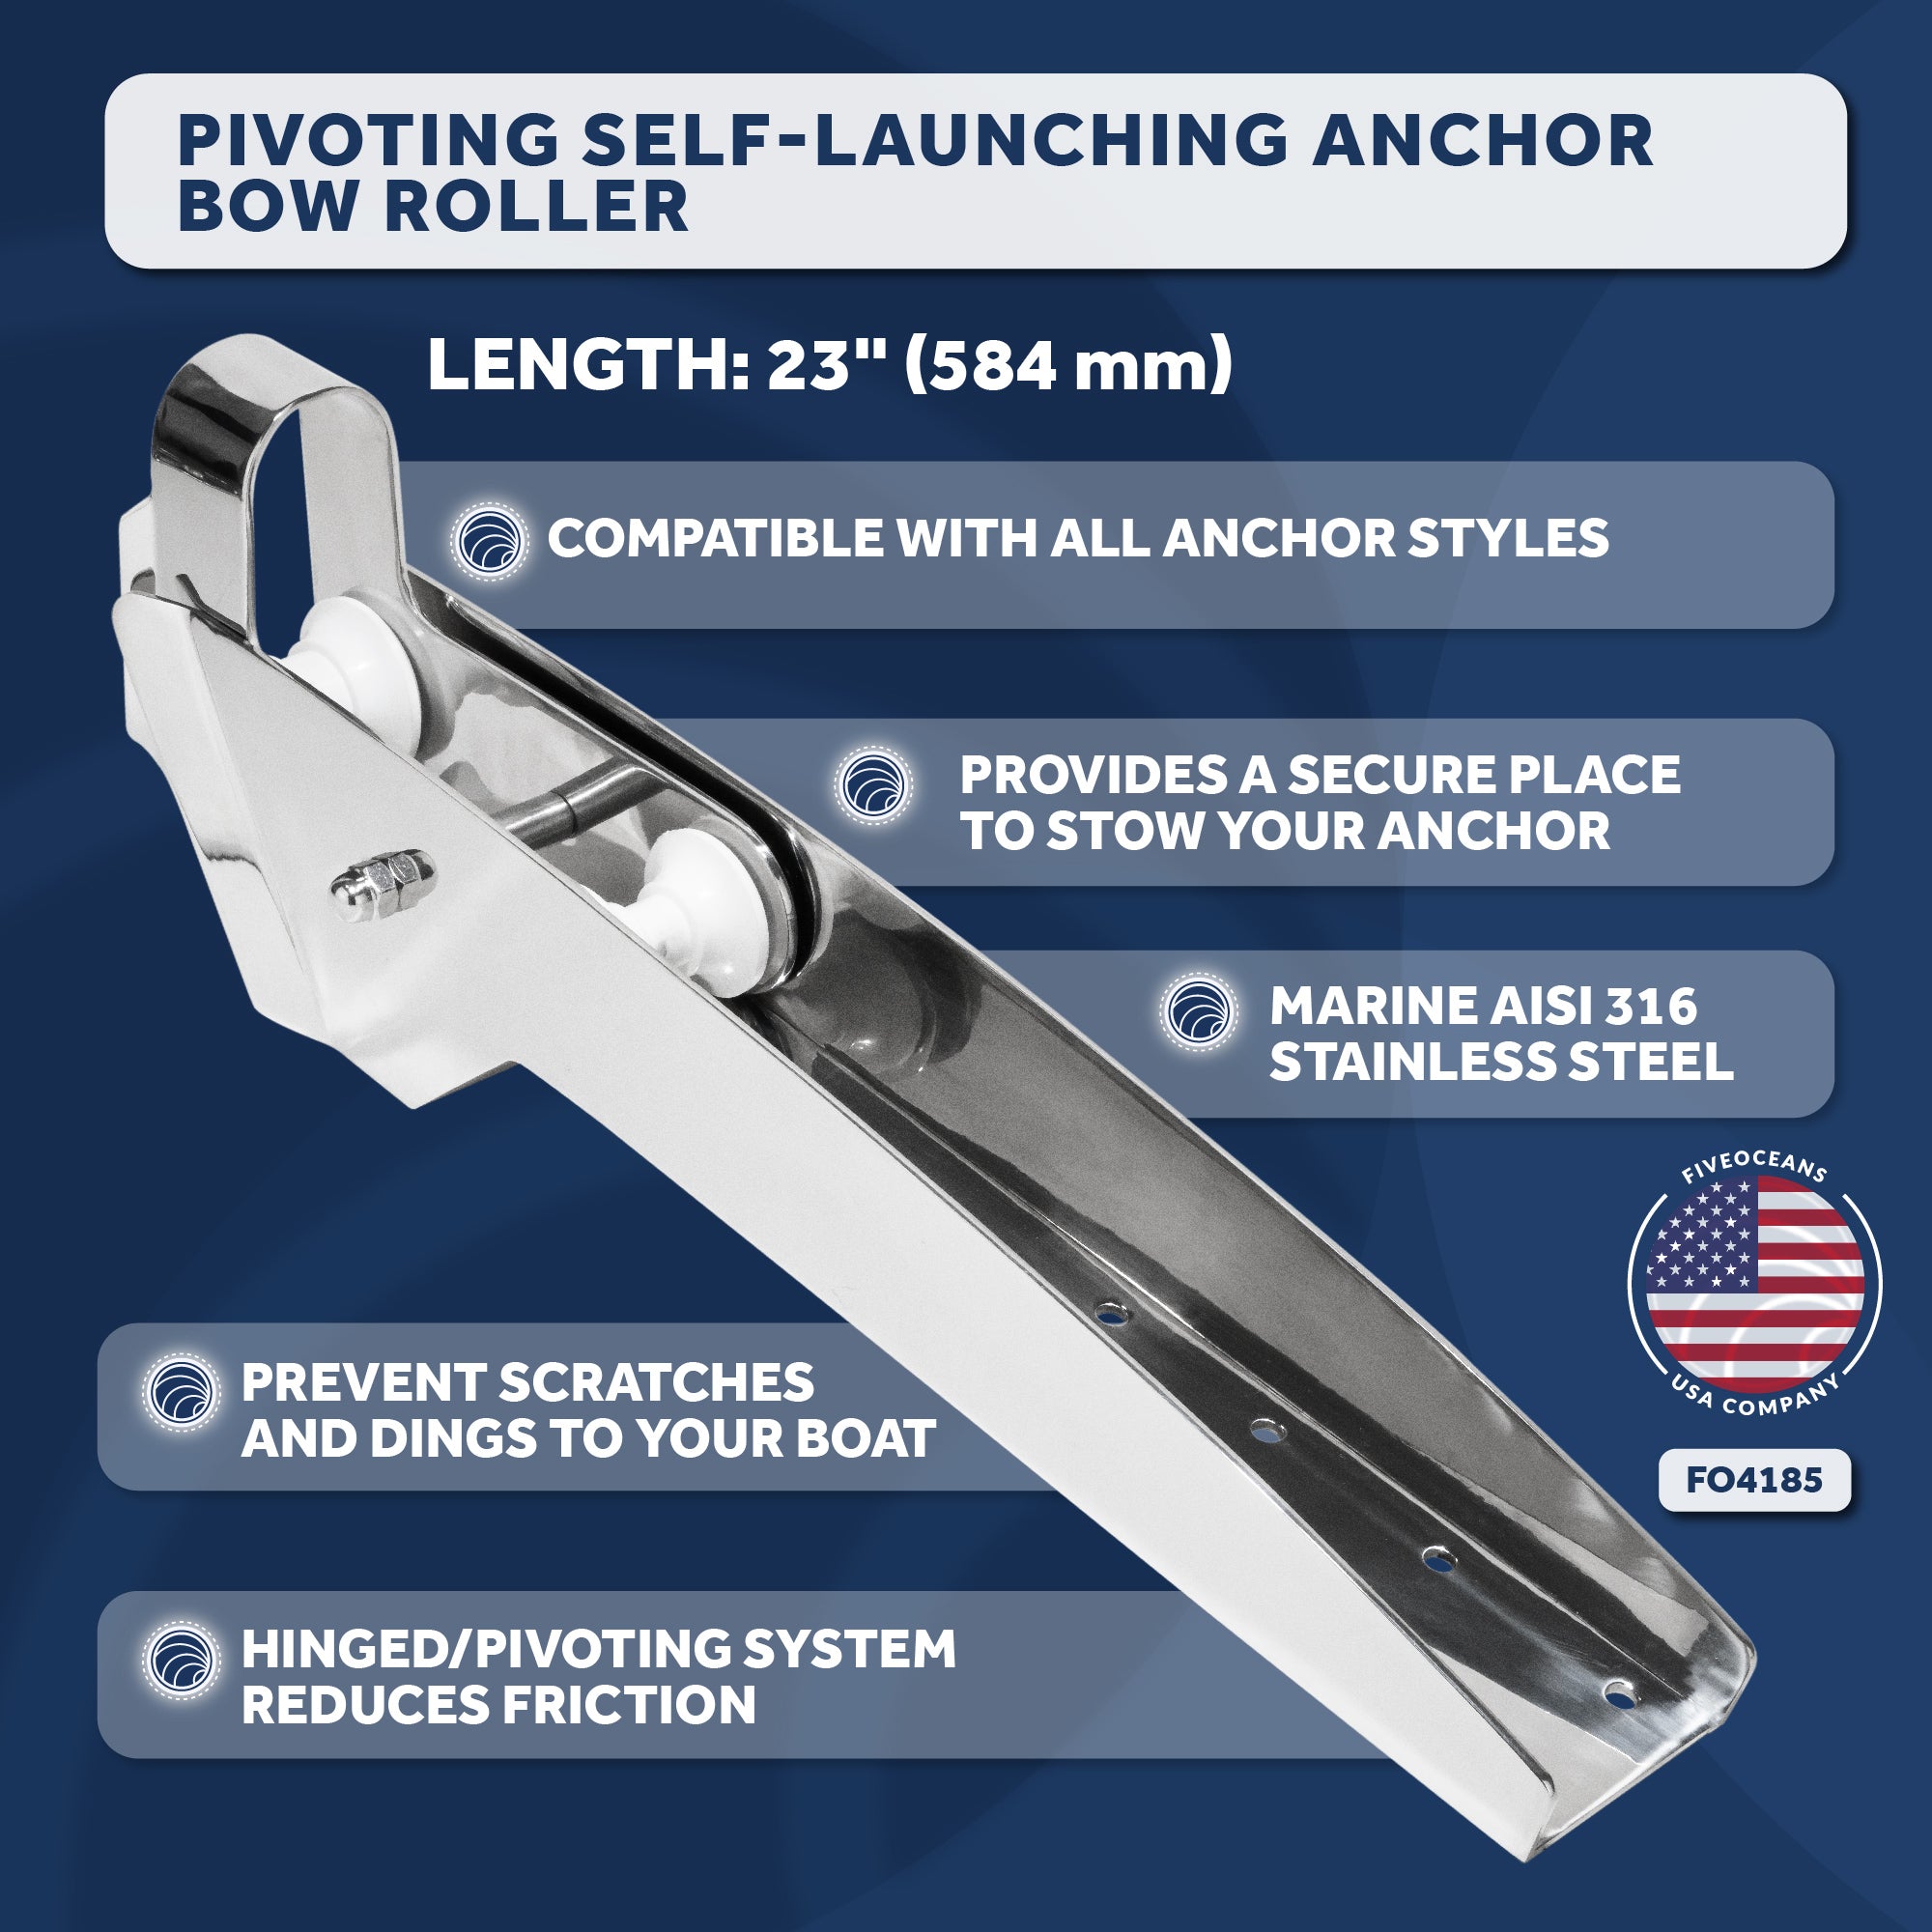 Pivoting Self-launching Anchor Bow Roller, Length 23", Stainless Steel - FO4185